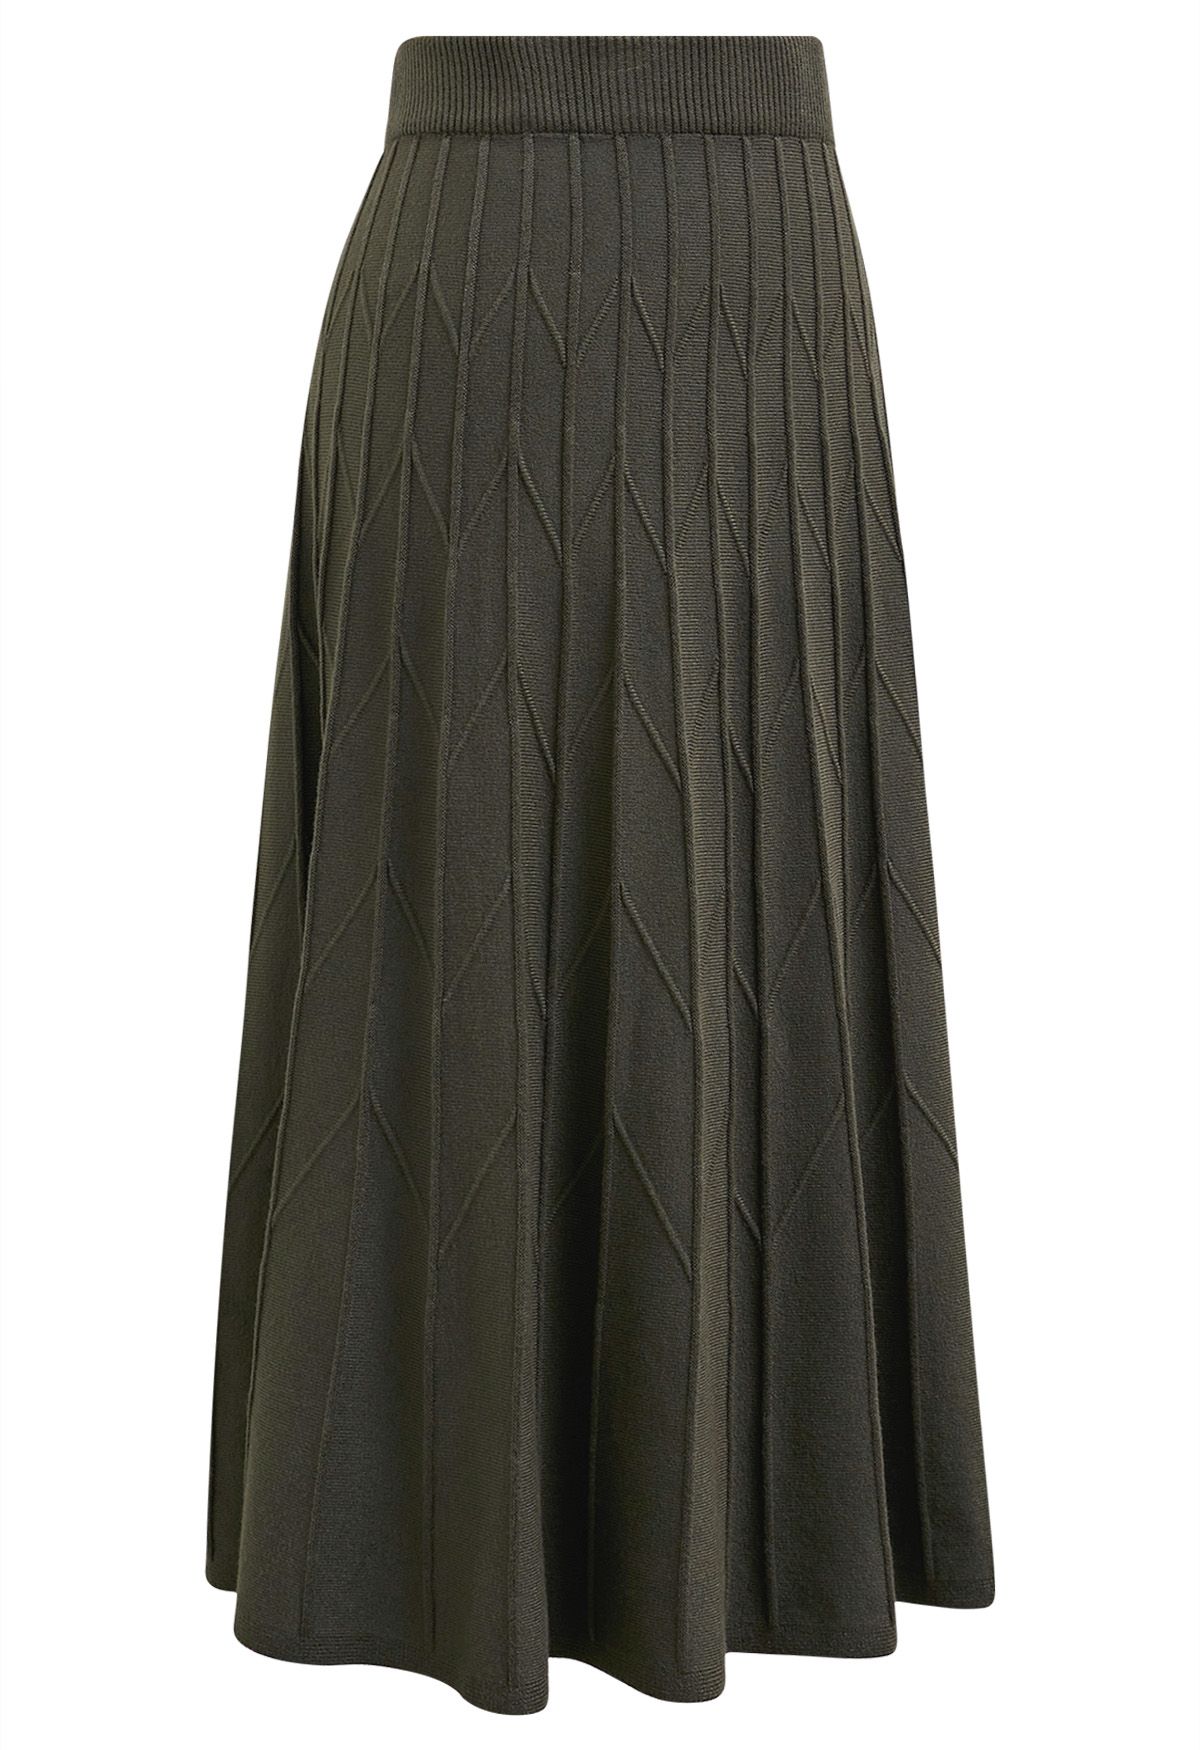 Zigzag Pleated Knit Skirt in Army Green